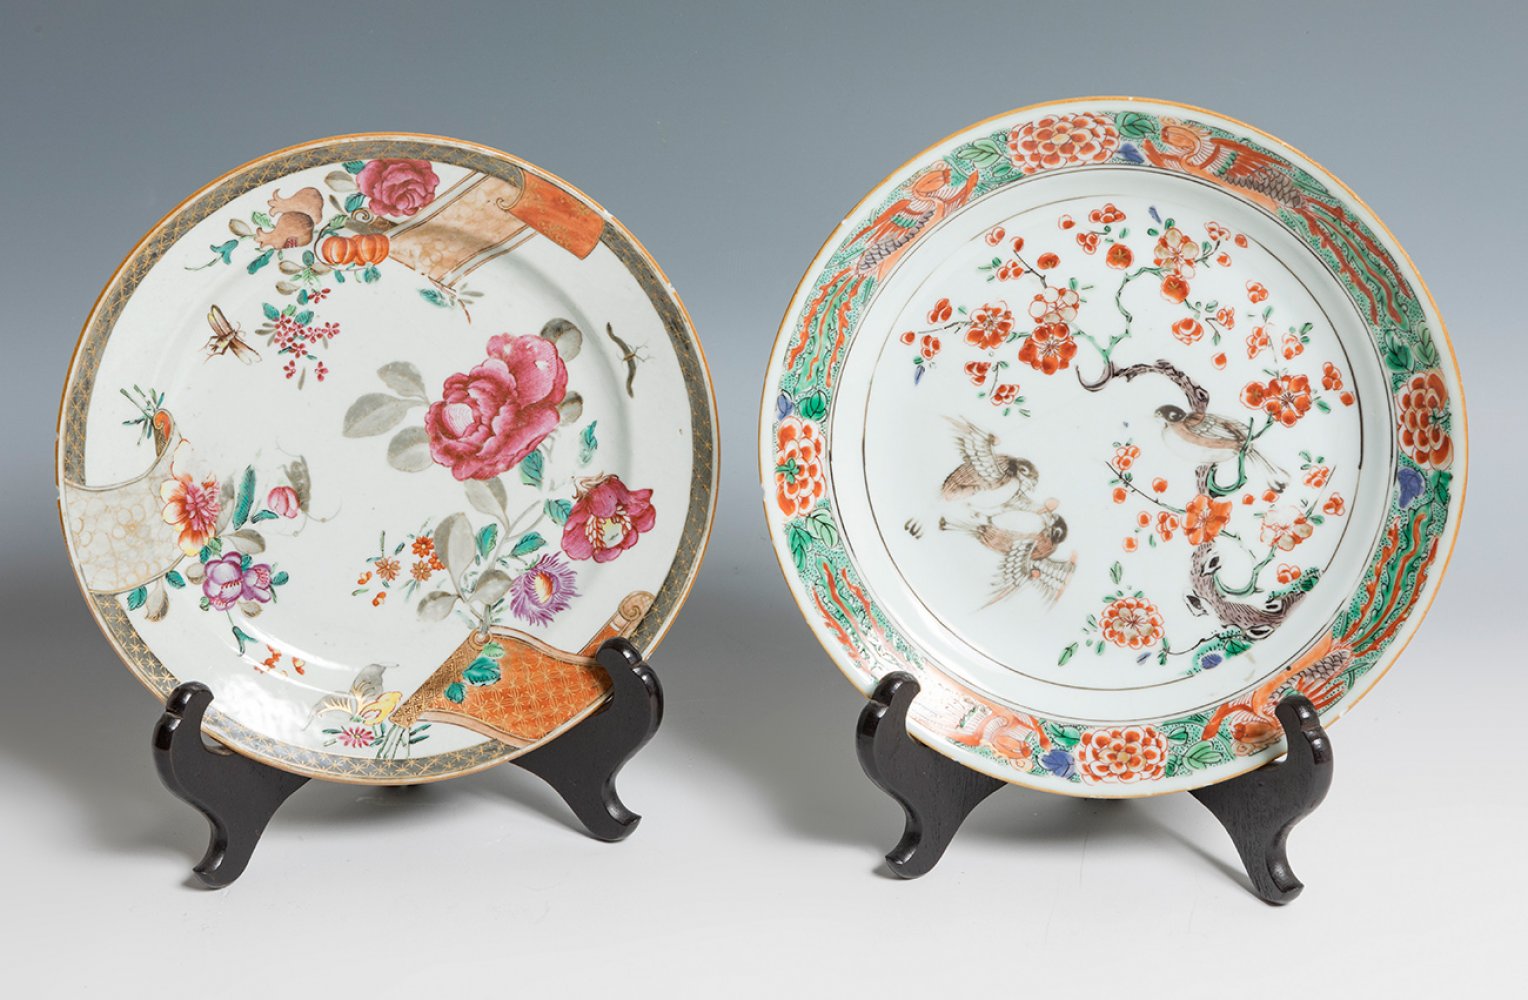 Pair of dishes. China, 19th century.Enamelled porcelain.Measurements: 24 cm (diameter) and 22 cm (